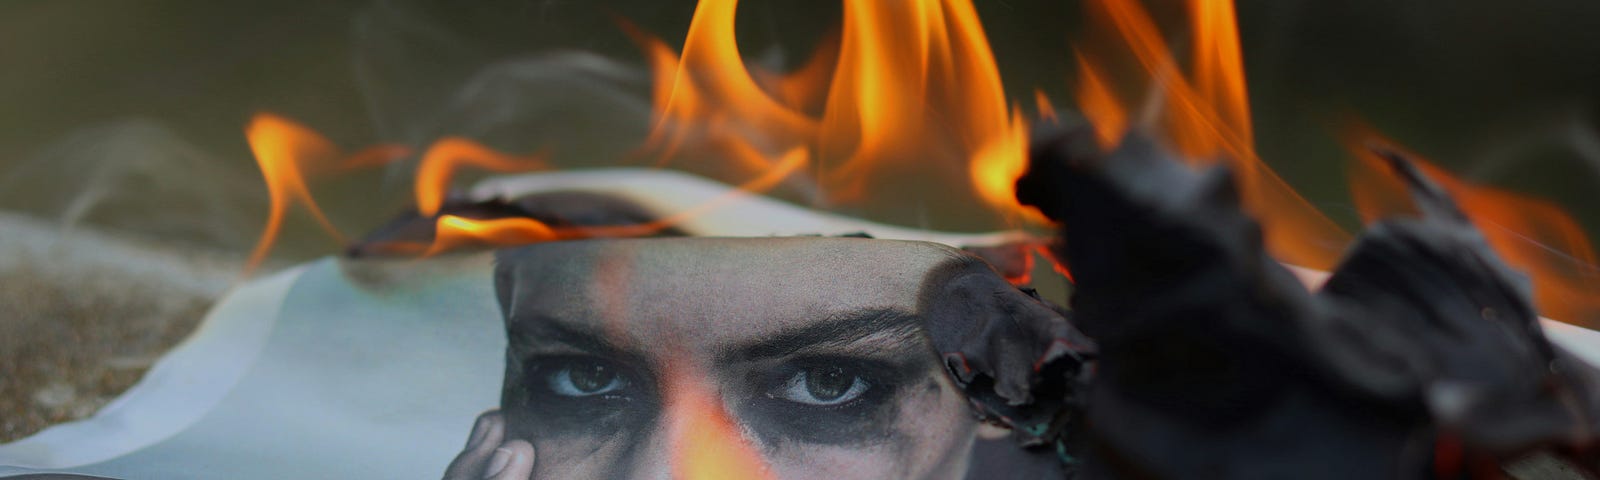 A photo of a woman’s face chars and curls as it burns on the ground. Her eyes stare into the camera.